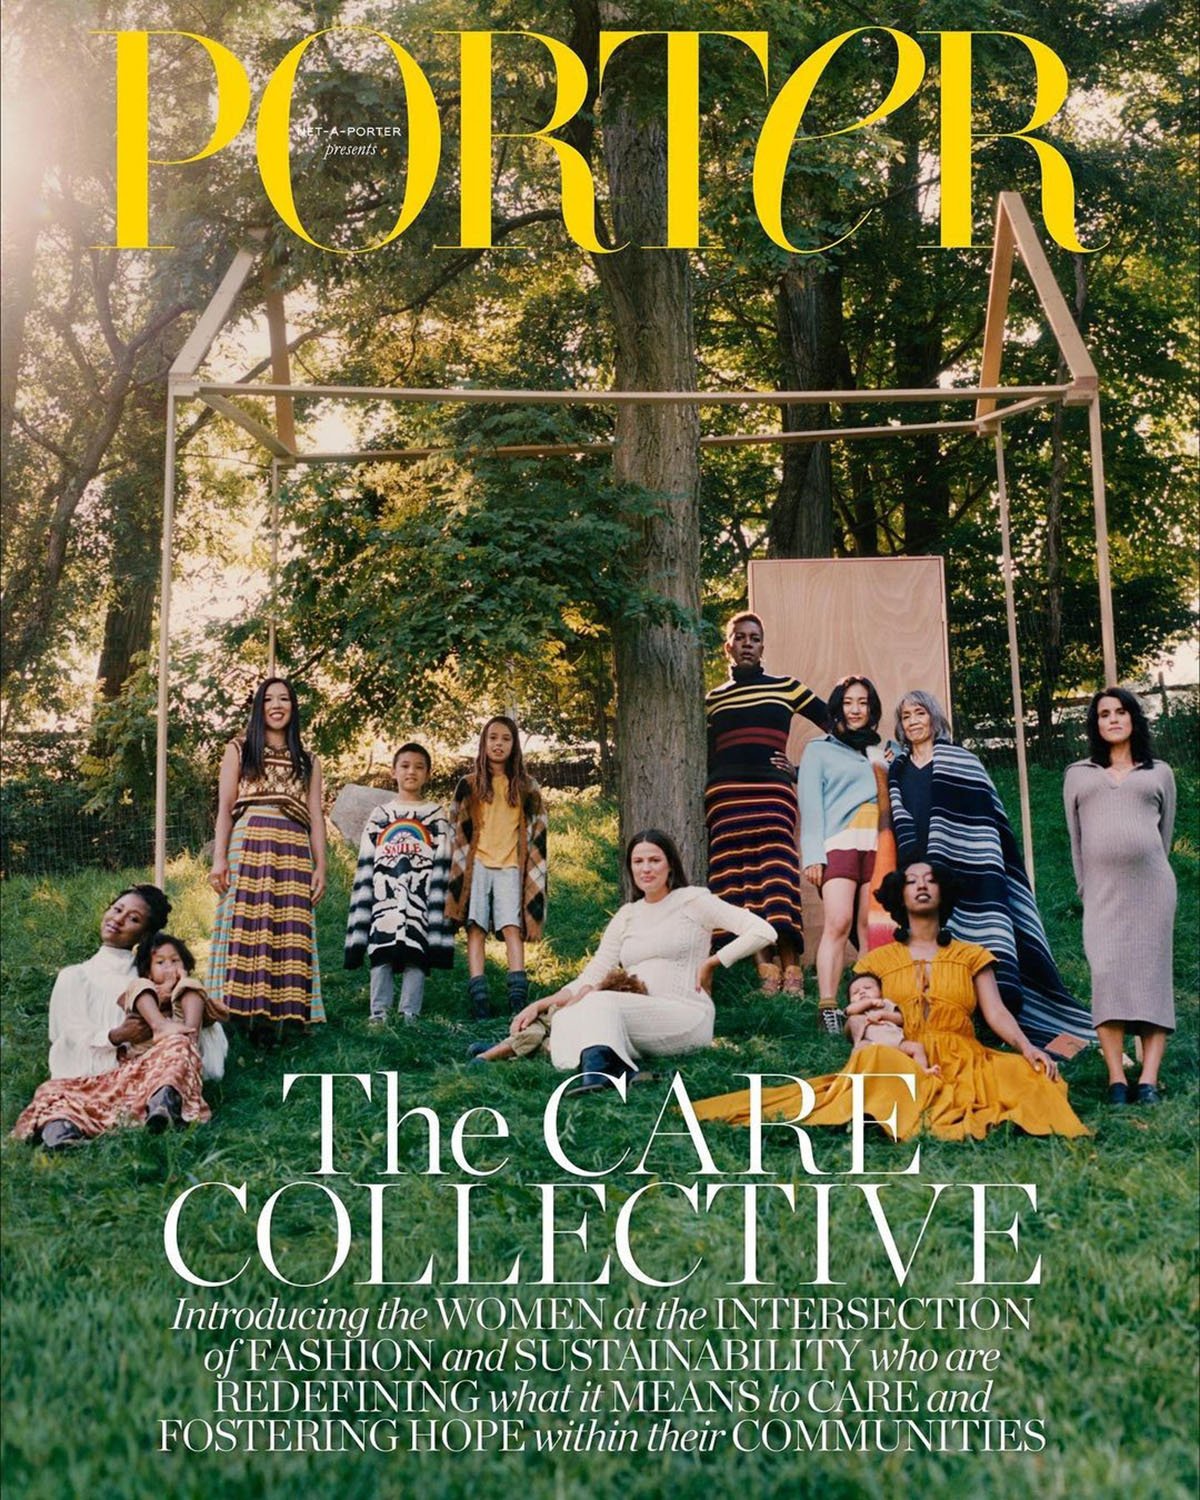 Porter-Magazine-August-23rd-2021-covers-by-Camila-Falquez-1-1.jpg